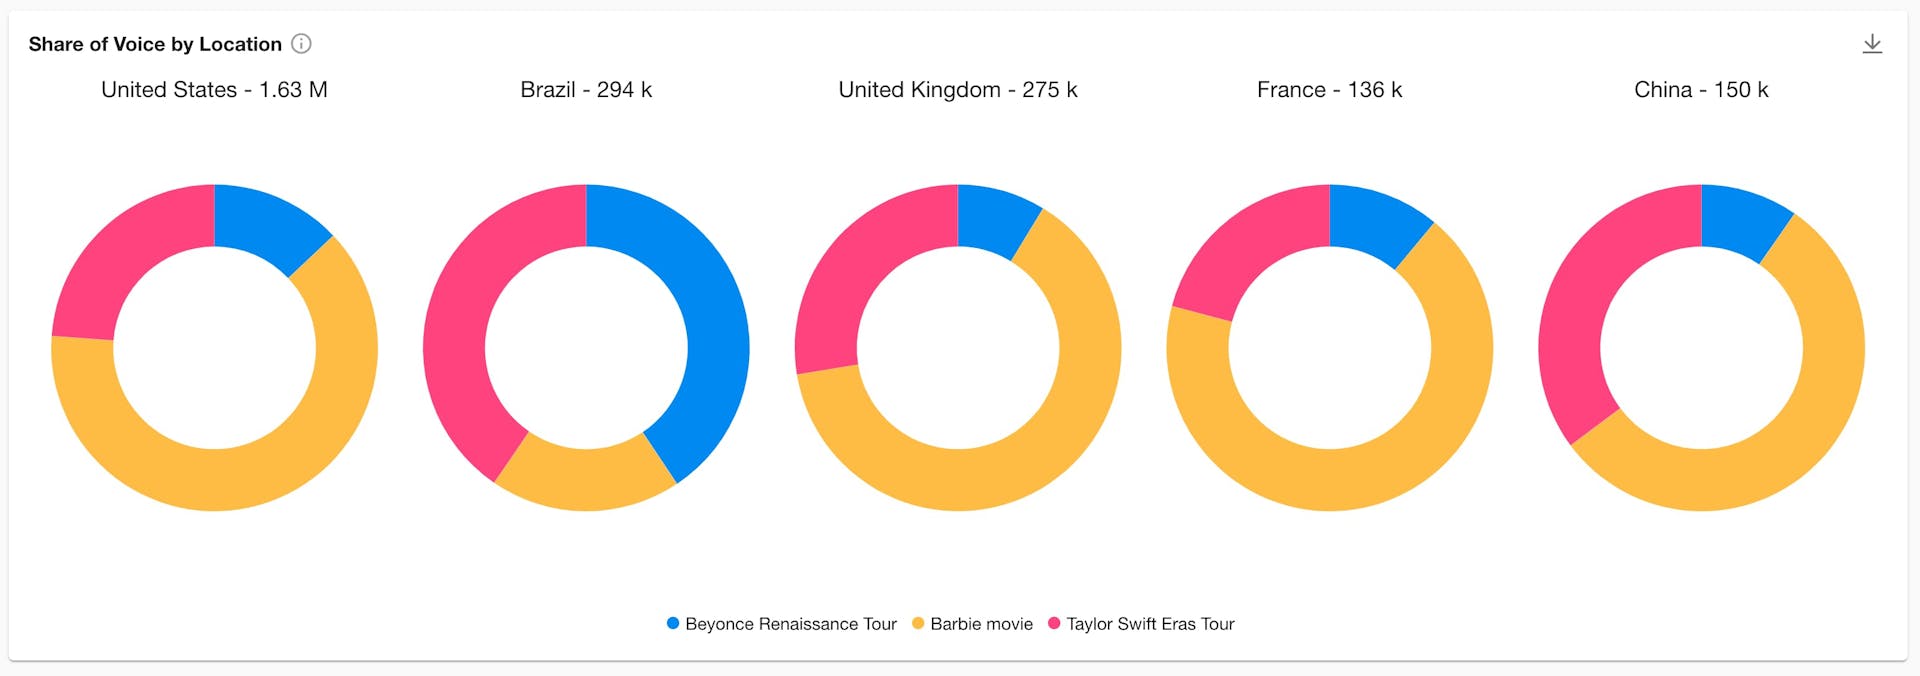 Ring charts showing the share of voice of the Barbie movie, Beyonce's Renaissance Tour, and Taylor Swift's Eras tour in the United States, Brazil, the United Kingdom, France, and China. 